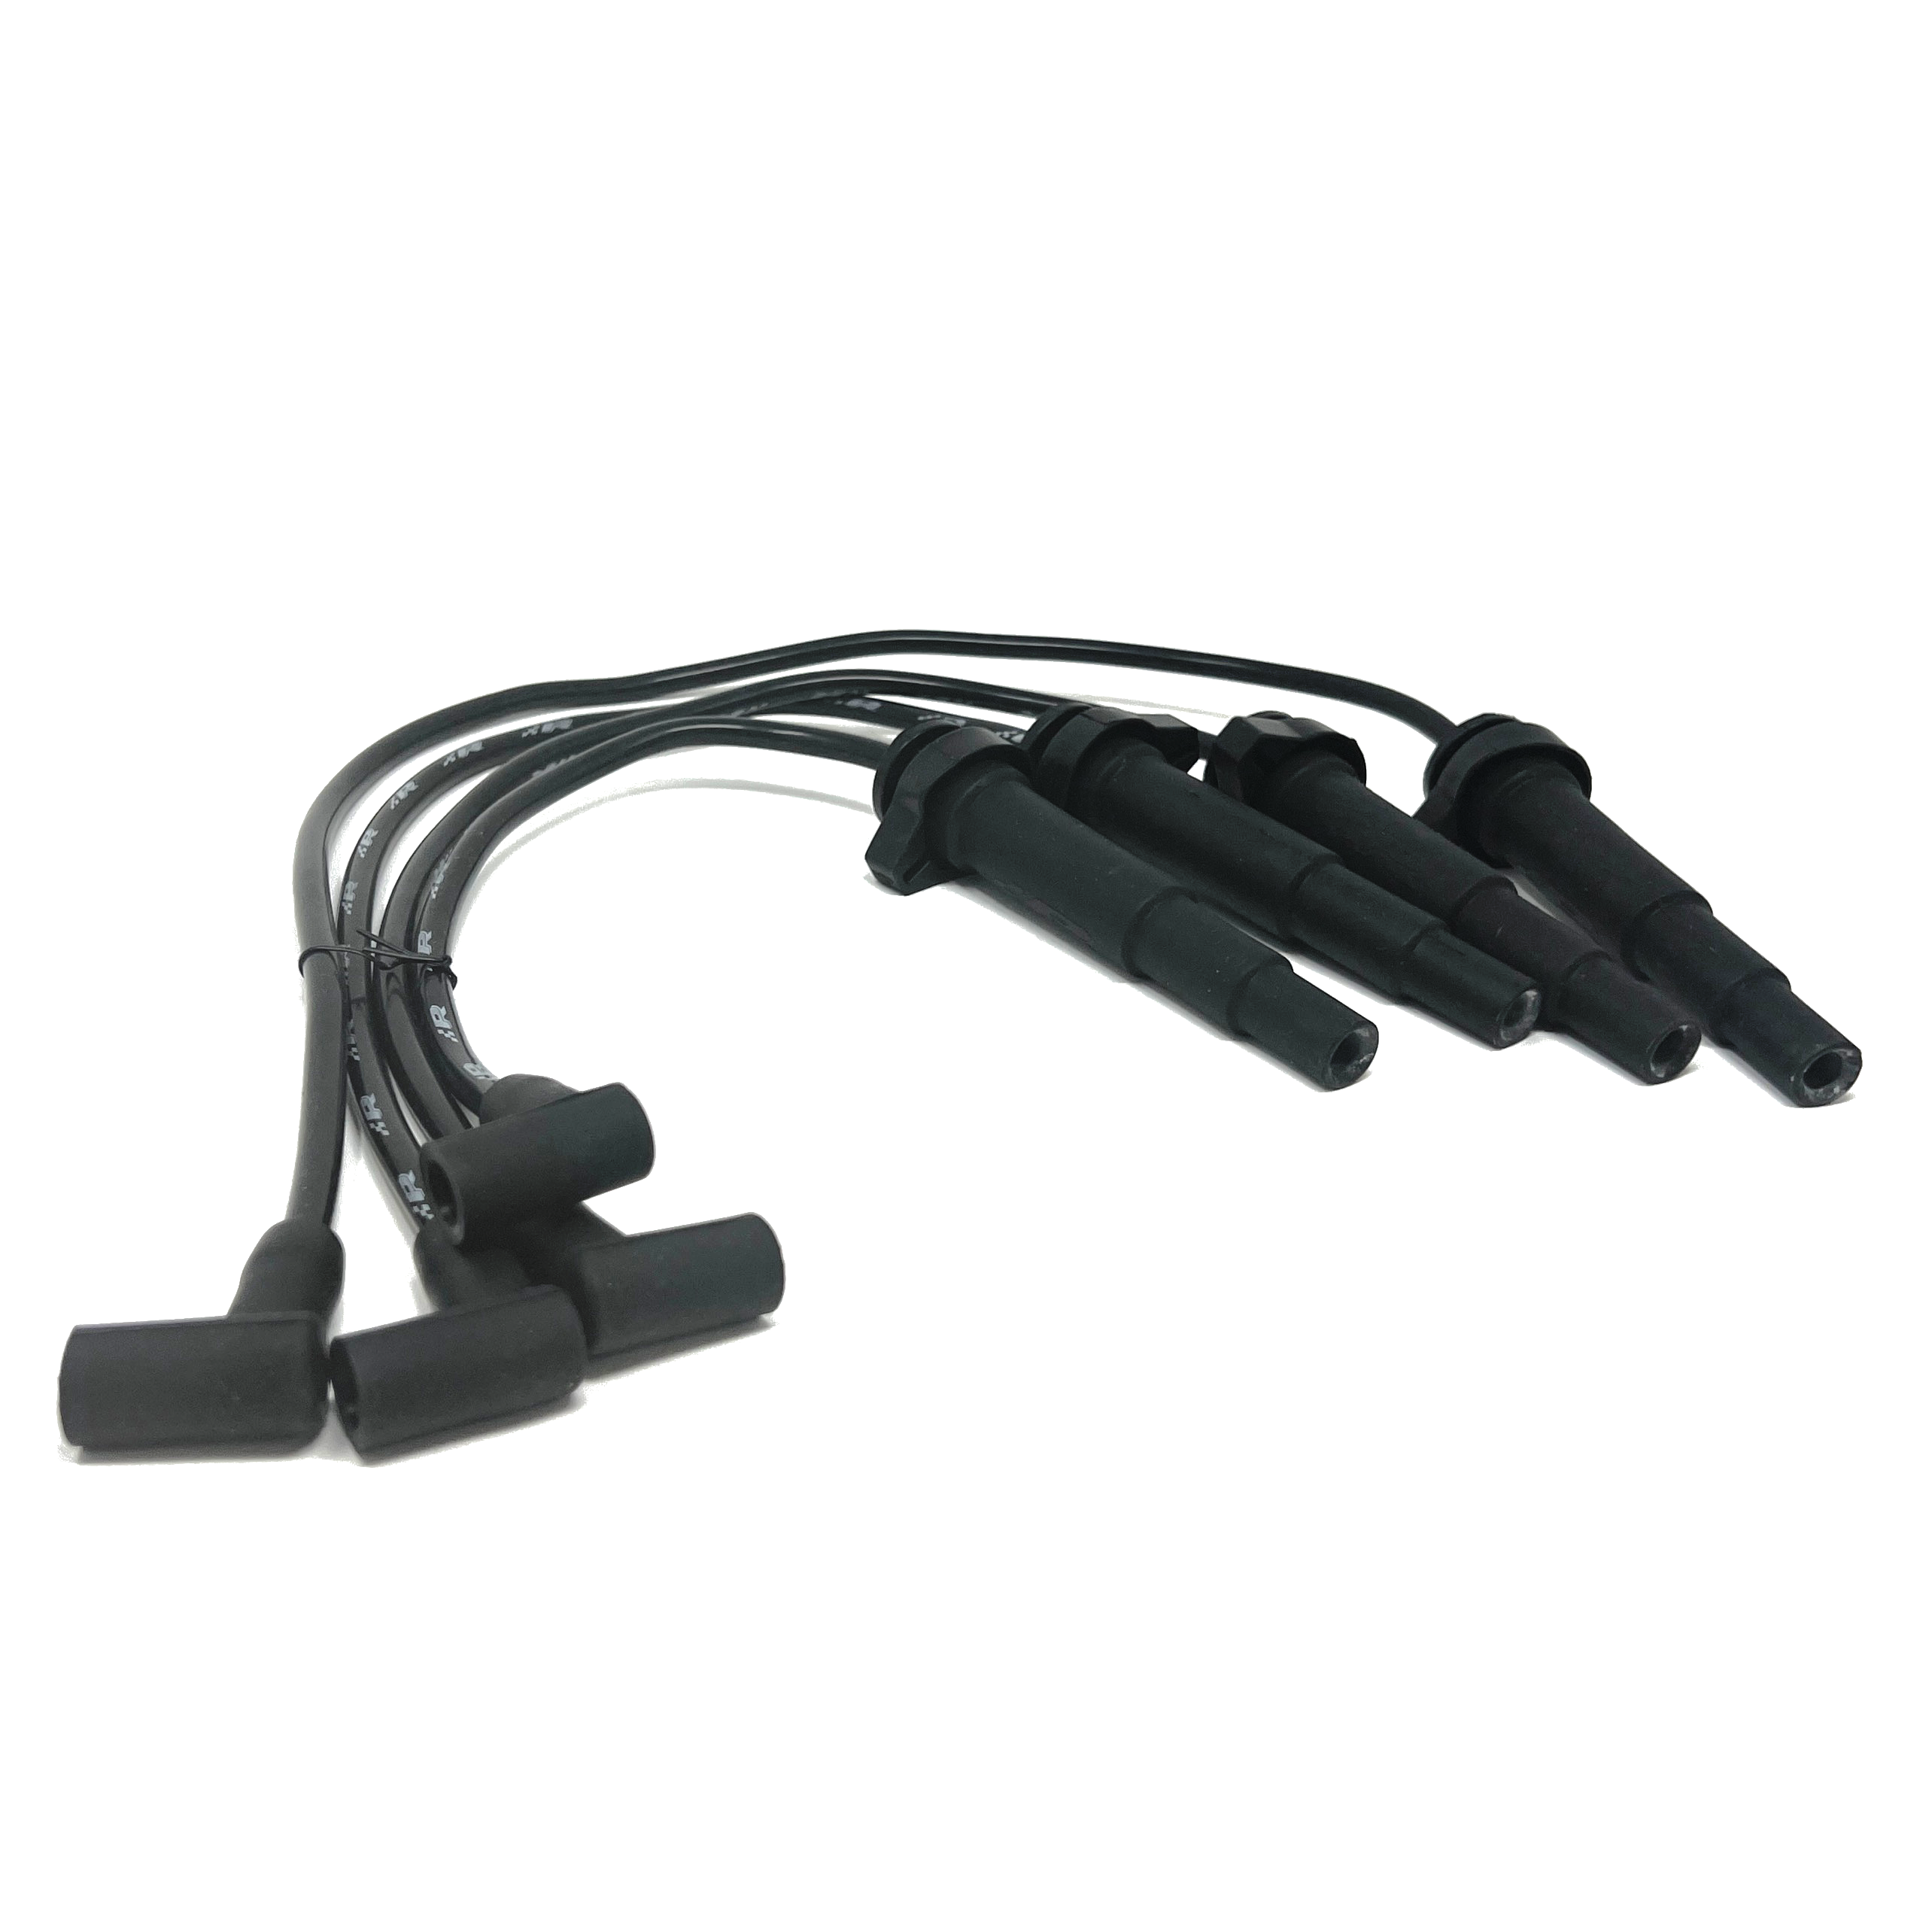 BMW N20 Replacement Spark Plug Wires (4pk)